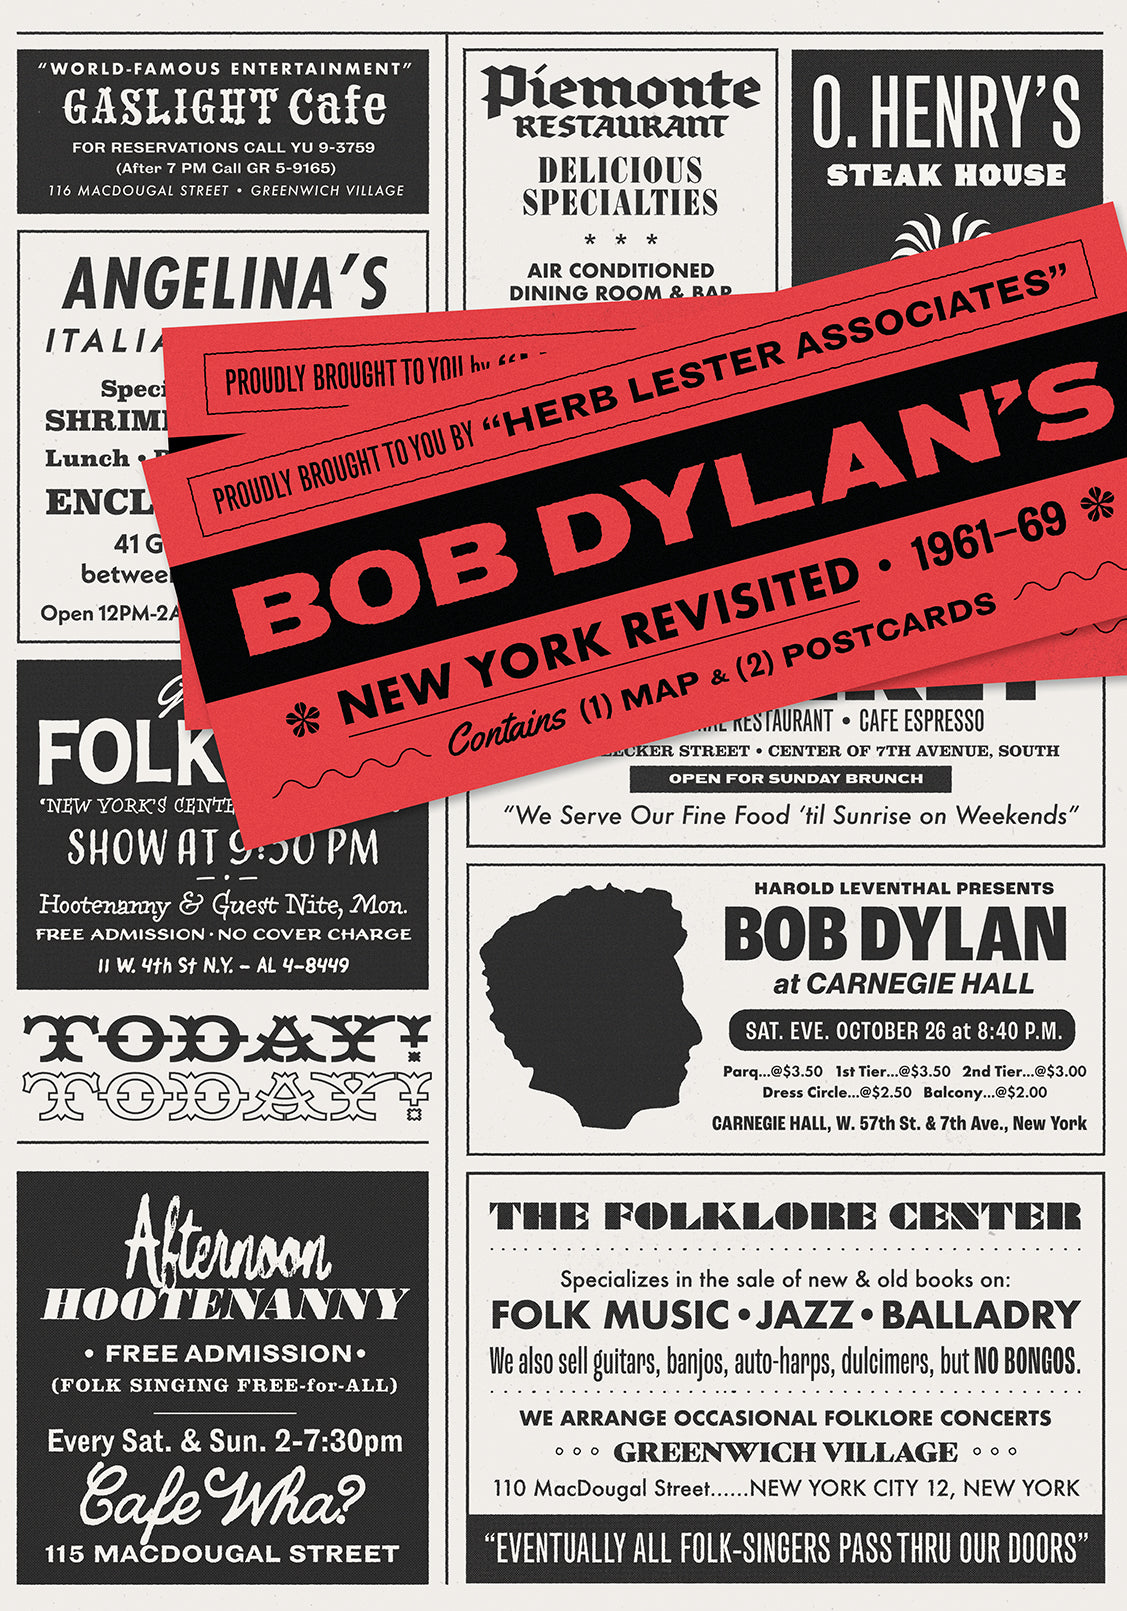 Bob Dylan's New York Revisited 1961-69